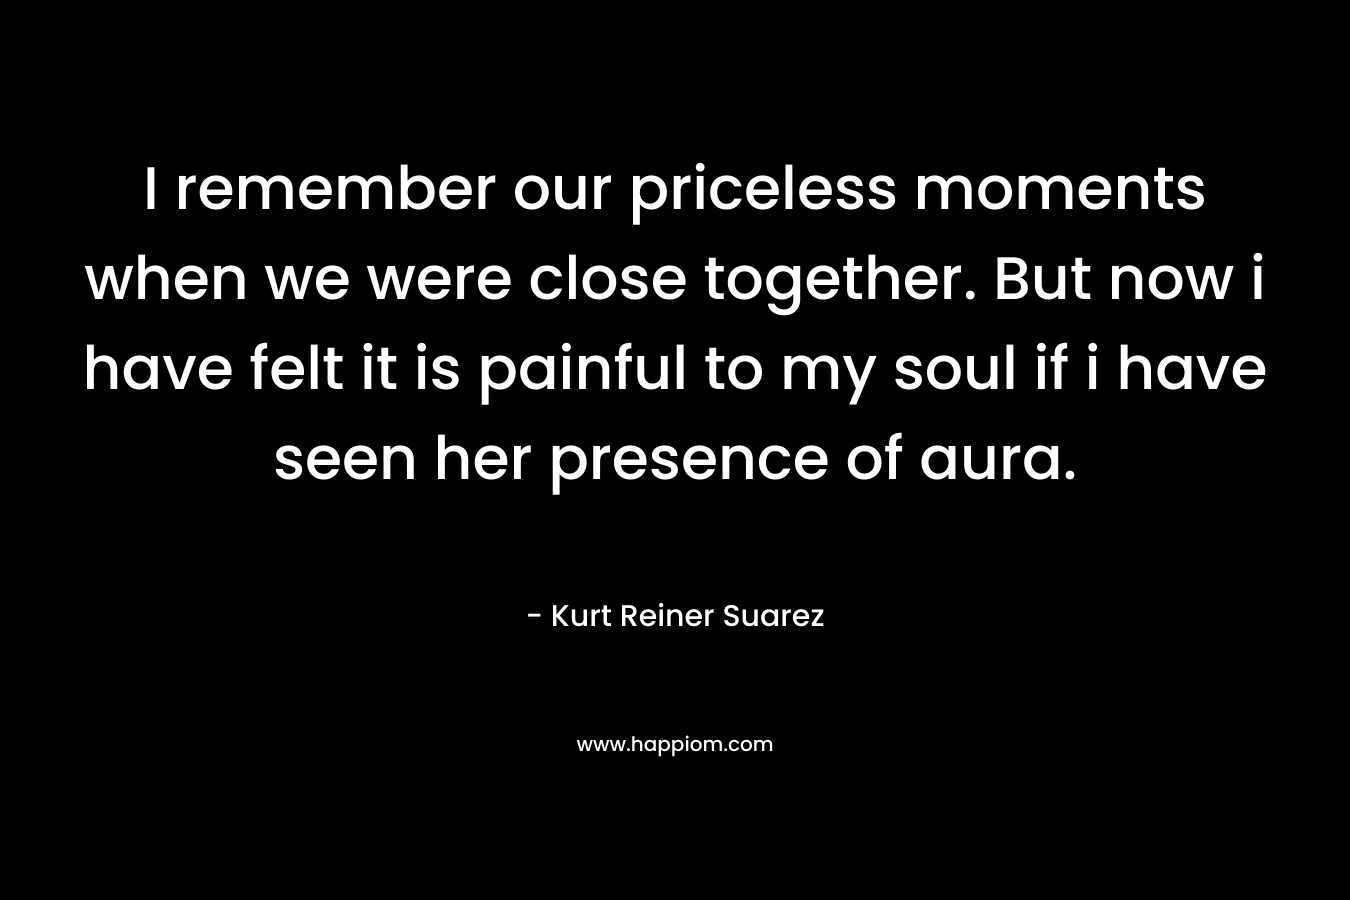 I remember our priceless moments when we were close together. But now i have felt it is painful to my soul if i have seen her presence of aura.